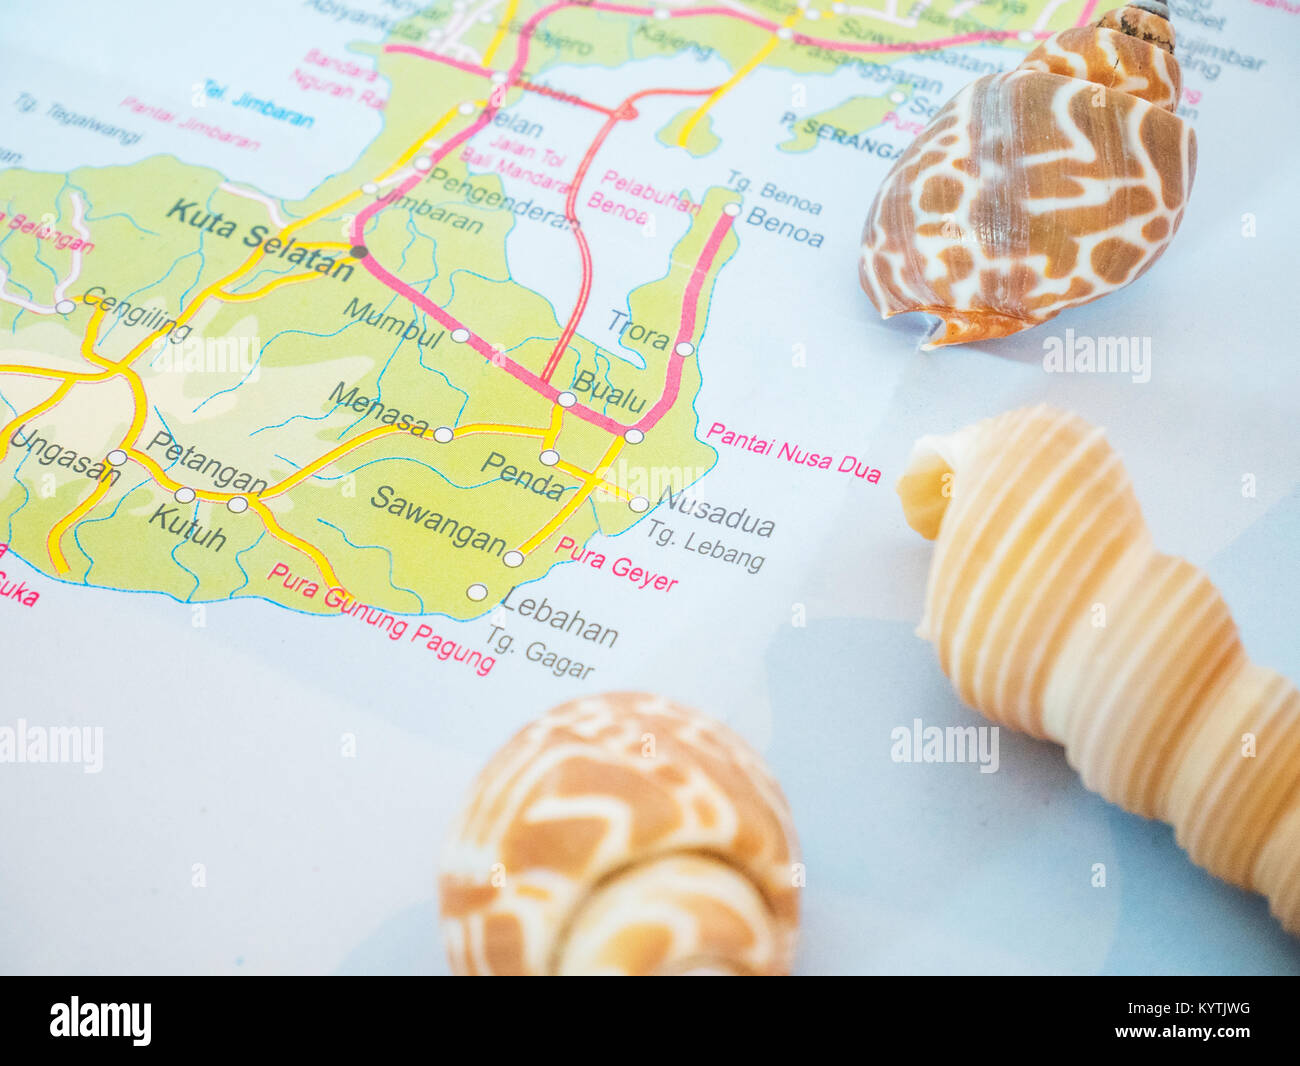 Bali Travel Maps with Seashells and with popular destination is Nusa Dua Beach Stock Photo